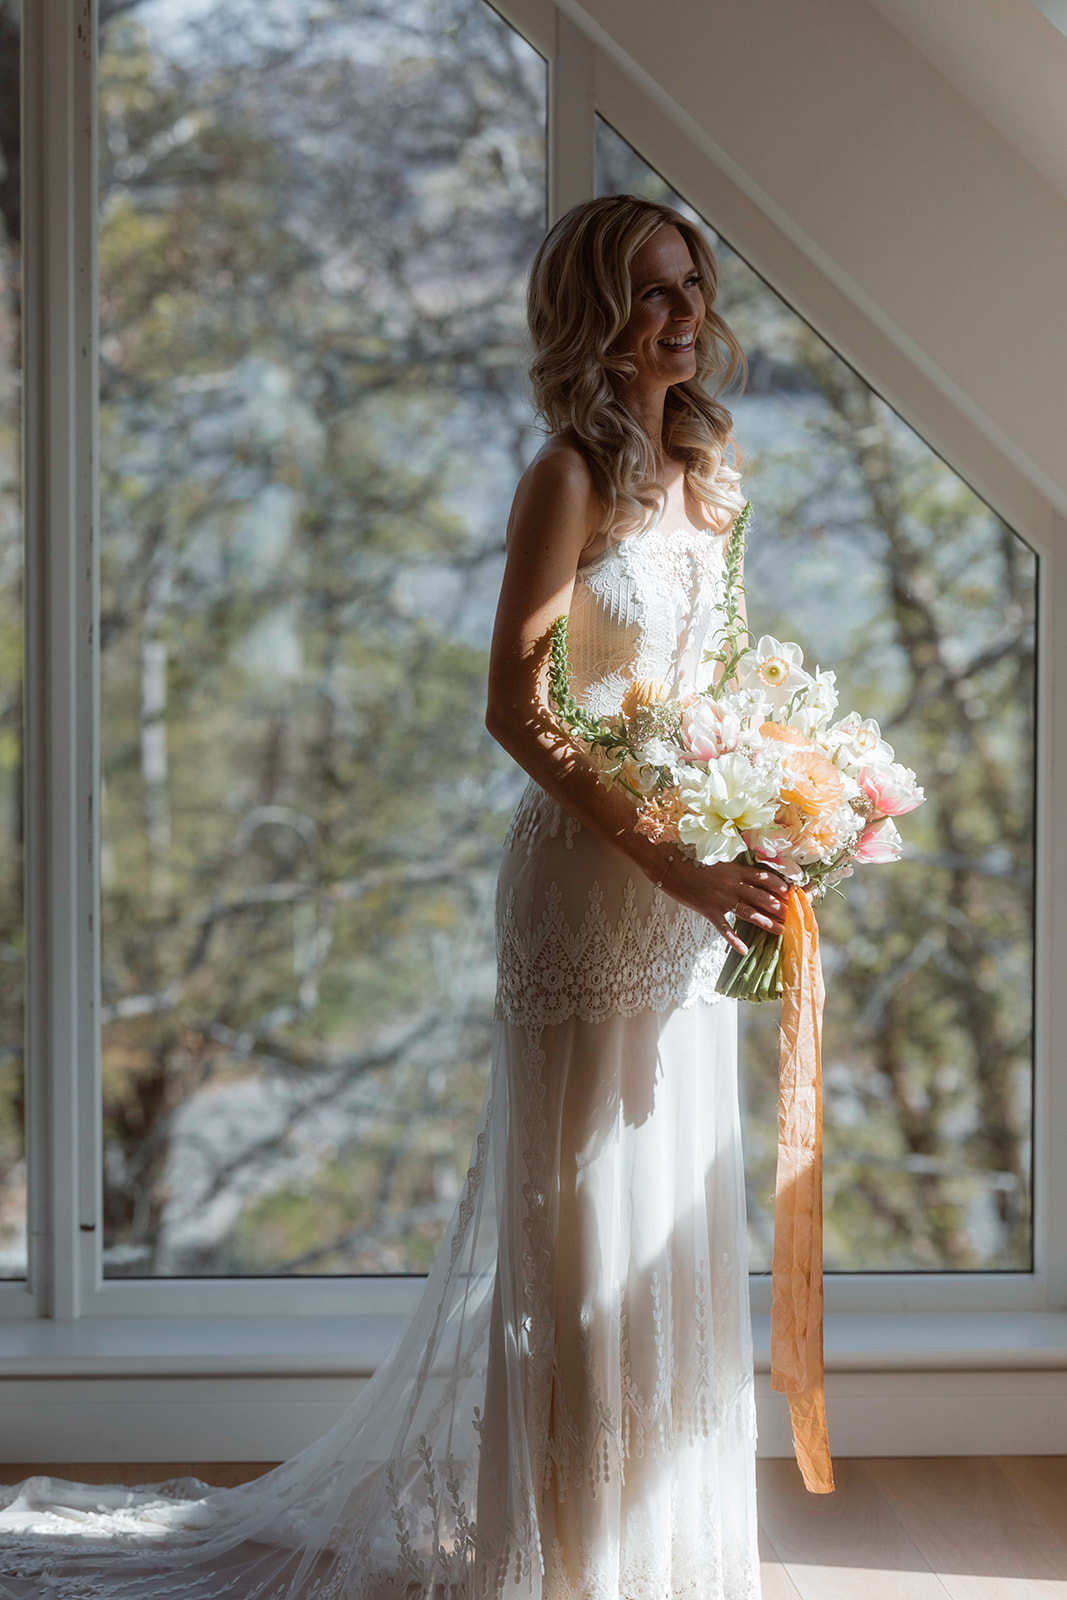 Kara wearing her gorgeous bridal gown while holding her bouquet for her Isle of Skye elopement